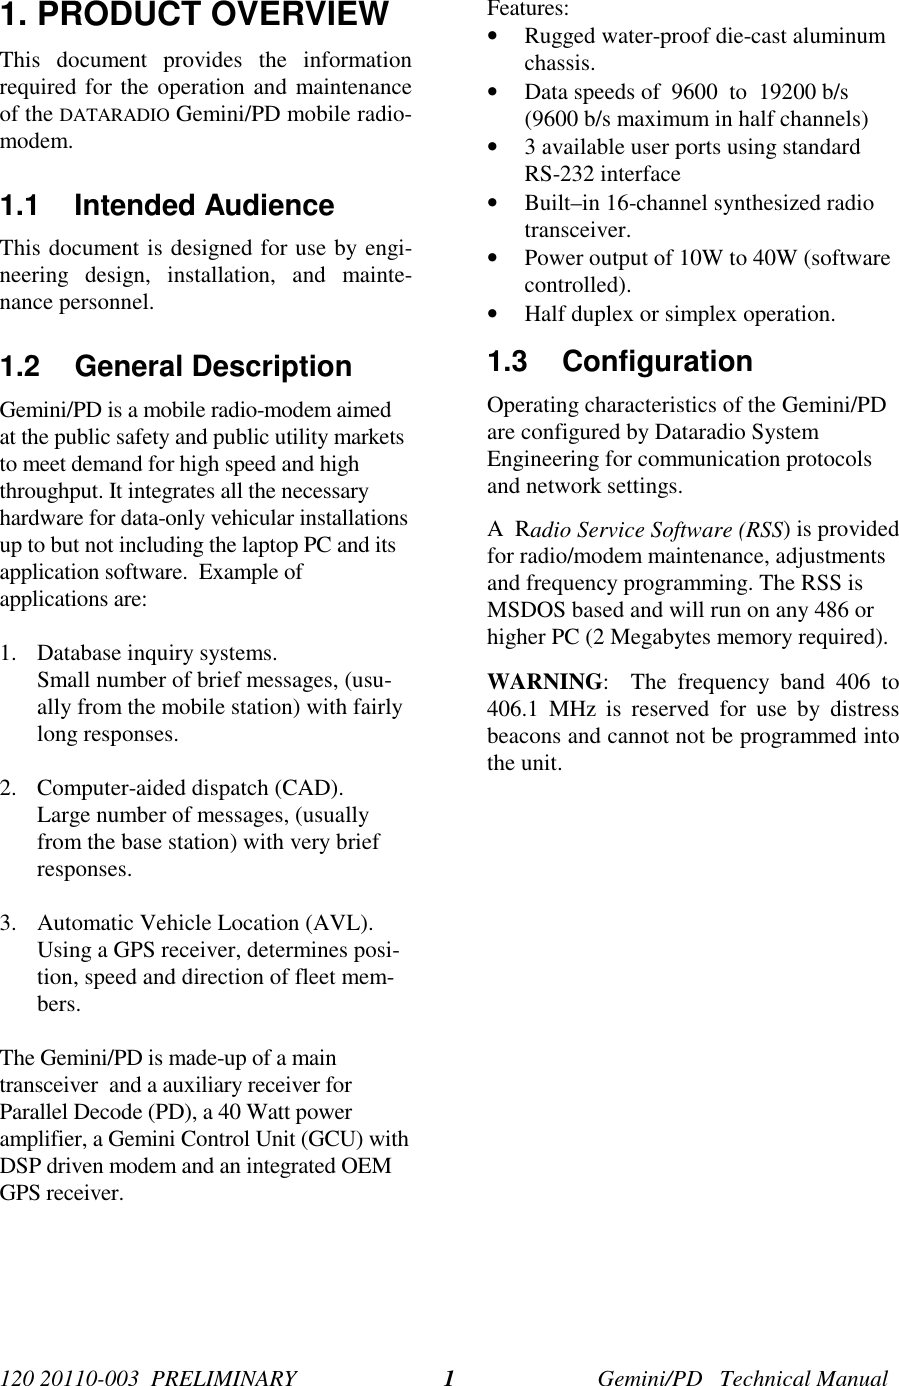 120 20110-003  PRELIMINARY Gemini/PD   Technical Manual11. PRODUCT OVERVIEWThis document provides the informationrequired for the operation and maintenanceof the DATARADIO Gemini/PD mobile radio-modem.1.1 Intended AudienceThis document is designed for use by engi-neering design, installation, and mainte-nance personnel.1.2 General DescriptionGemini/PD is a mobile radio-modem aimedat the public safety and public utility marketsto meet demand for high speed and highthroughput. It integrates all the necessaryhardware for data-only vehicular installationsup to but not including the laptop PC and itsapplication software.  Example ofapplications are:1. Database inquiry systems.Small number of brief messages, (usu-ally from the mobile station) with fairlylong responses.2. Computer-aided dispatch (CAD).Large number of messages, (usuallyfrom the base station) with very briefresponses.3. Automatic Vehicle Location (AVL).Using a GPS receiver, determines posi-tion, speed and direction of fleet mem-bers.The Gemini/PD is made-up of a maintransceiver  and a auxiliary receiver forParallel Decode (PD), a 40 Watt poweramplifier, a Gemini Control Unit (GCU) withDSP driven modem and an integrated OEMGPS receiver.Features:• Rugged water-proof die-cast aluminumchassis.• Data speeds of  9600  to  19200 b/s(9600 b/s maximum in half channels)• 3 available user ports using standardRS-232 interface• Built–in 16-channel synthesized radiotransceiver.• Power output of 10W to 40W (softwarecontrolled).• Half duplex or simplex operation.1.3 ConfigurationOperating characteristics of the Gemini/PDare configured by Dataradio SystemEngineering for communication protocolsand network settings.A  Radio Service Software (RSS) is providedfor radio/modem maintenance, adjustmentsand frequency programming. The RSS isMSDOS based and will run on any 486 orhigher PC (2 Megabytes memory required).WARNING:  The frequency band 406 to406.1 MHz is reserved for use by distressbeacons and cannot not be programmed intothe unit.